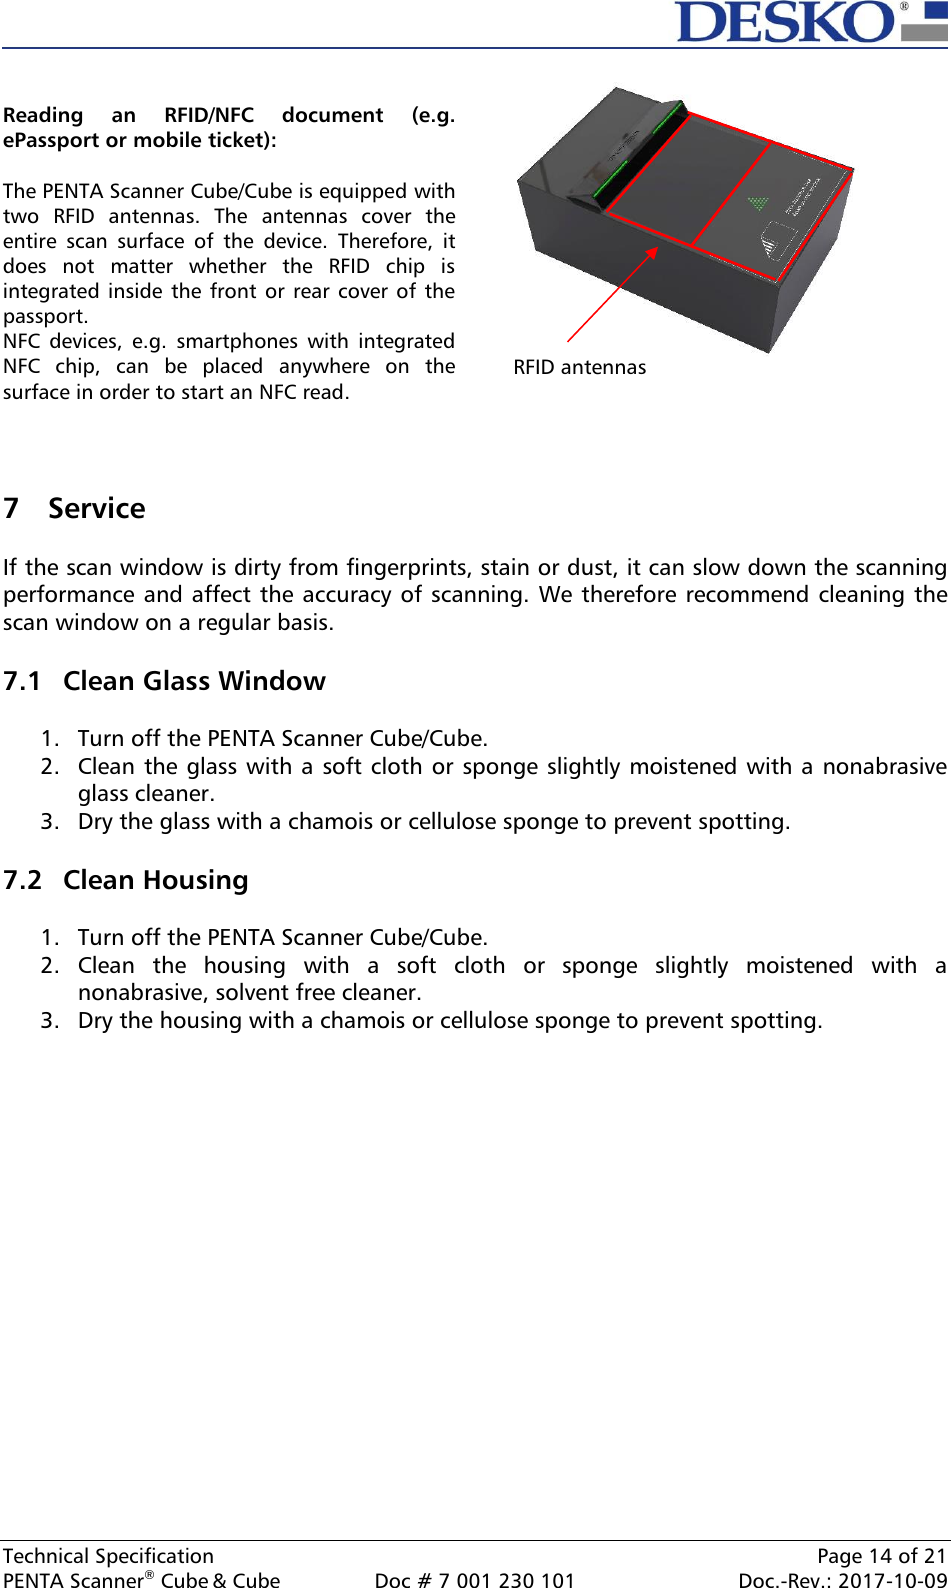  Technical Specification    Page 14 of 21 PENTA Scanner® Cube &amp; Cube  Doc # 7 001 230 101  Doc.-Rev.: 2017-10-09     7 Service  If the scan window is dirty from fingerprints, stain or dust, it can slow down the scanning performance and affect the accuracy of scanning. We therefore recommend cleaning the scan window on a regular basis.  7.1 Clean Glass Window  1. Turn off the PENTA Scanner Cube/Cube. 2. Clean the glass with a soft cloth or sponge slightly moistened with a nonabrasive glass cleaner. 3. Dry the glass with a chamois or cellulose sponge to prevent spotting.  7.2 Clean Housing  1. Turn off the PENTA Scanner Cube/Cube. 2. Clean  the  housing  with  a  soft  cloth  or  sponge  slightly  moistened  with  a nonabrasive, solvent free cleaner. 3. Dry the housing with a chamois or cellulose sponge to prevent spotting.     Reading  an  RFID/NFC  document  (e.g. ePassport or mobile ticket):  The PENTA Scanner Cube/Cube is equipped with two  RFID  antennas.  The  antennas  cover  the entire  scan  surface  of  the  device.  Therefore,  it does  not  matter  whether  the  RFID  chip  is integrated inside  the  front or rear cover  of the passport.  NFC  devices,  e.g.  smartphones  with  integrated NFC  chip,  can  be  placed  anywhere  on  the surface in order to start an NFC read.    RFID antennas 